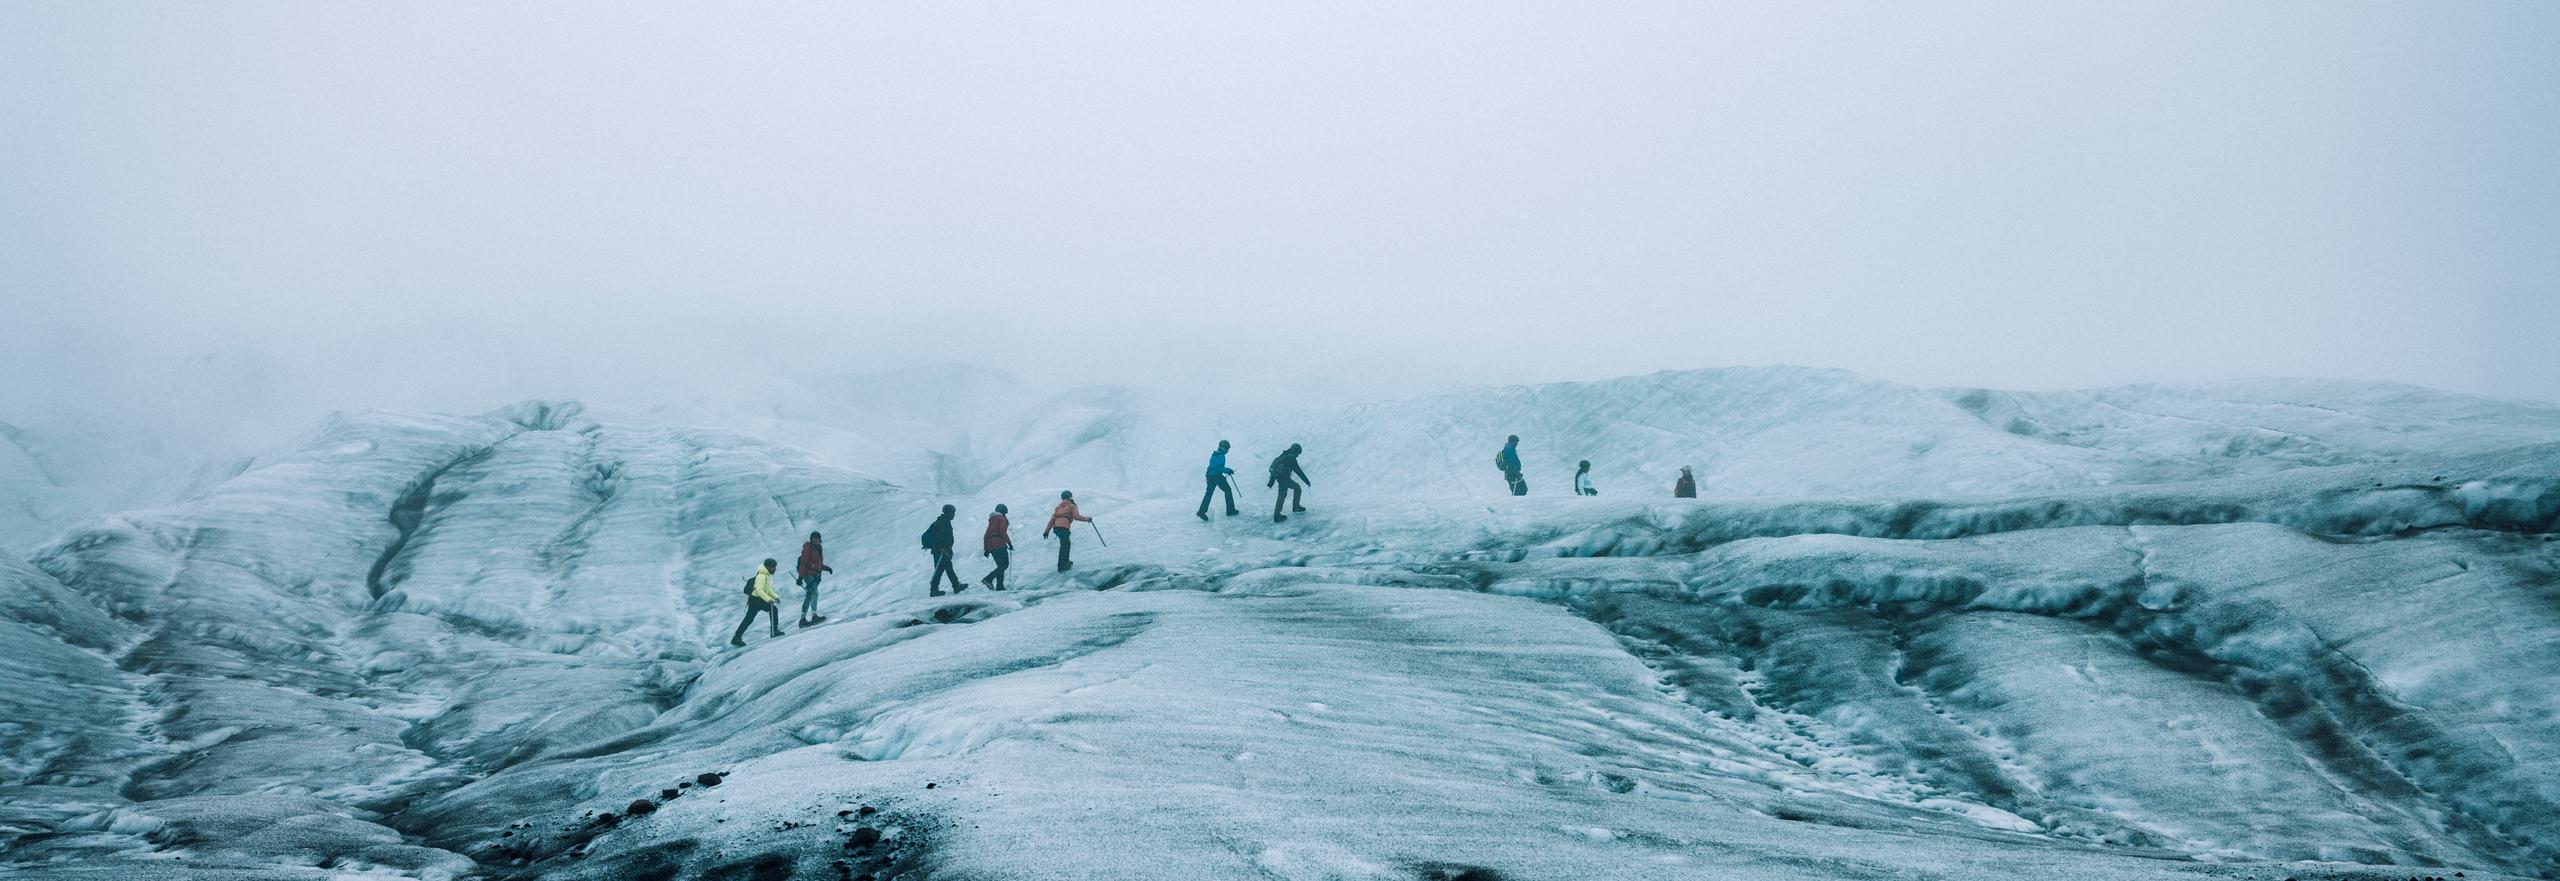 Group of people hiking across glacier in Iceland